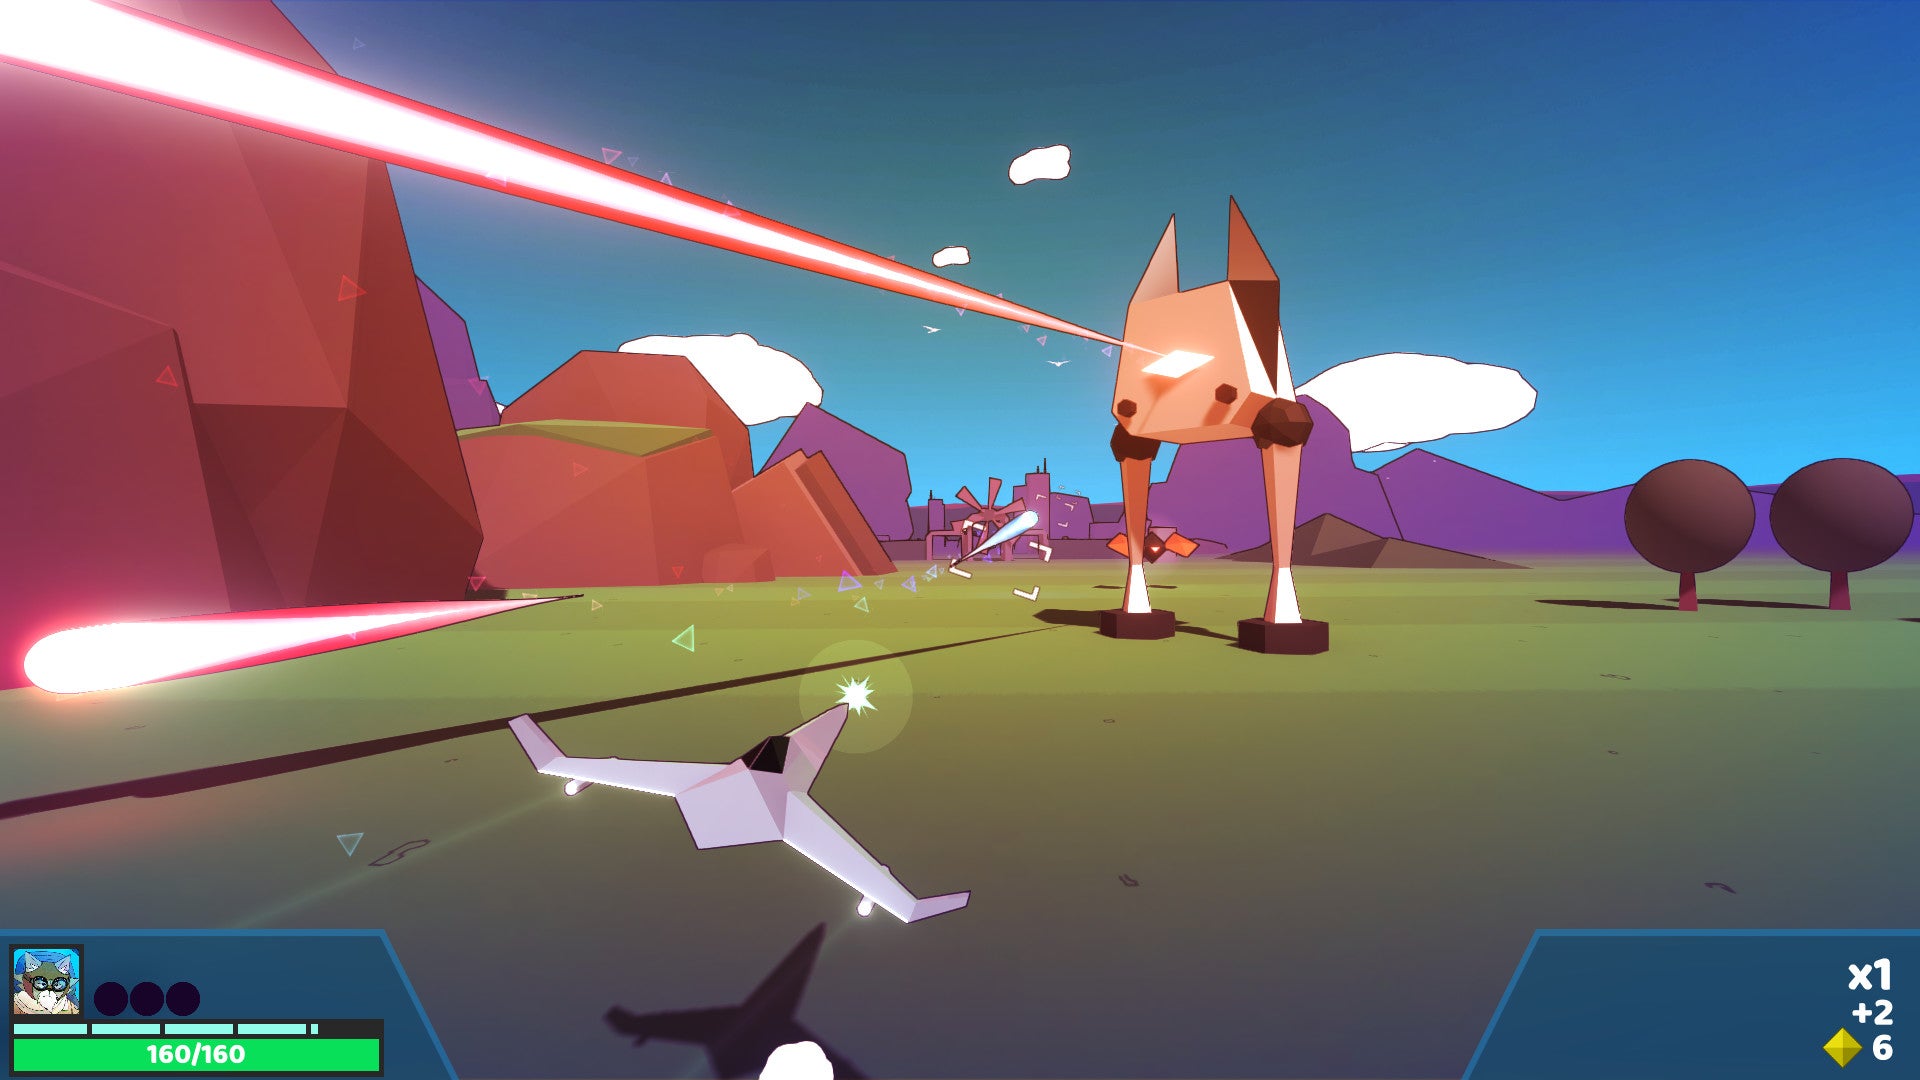 A screenshot of Whisker Squadron, showing a polygonal ship facing away from the camera in the foreground and firing lasers at a larger bipedal robot with a kitty-like head.